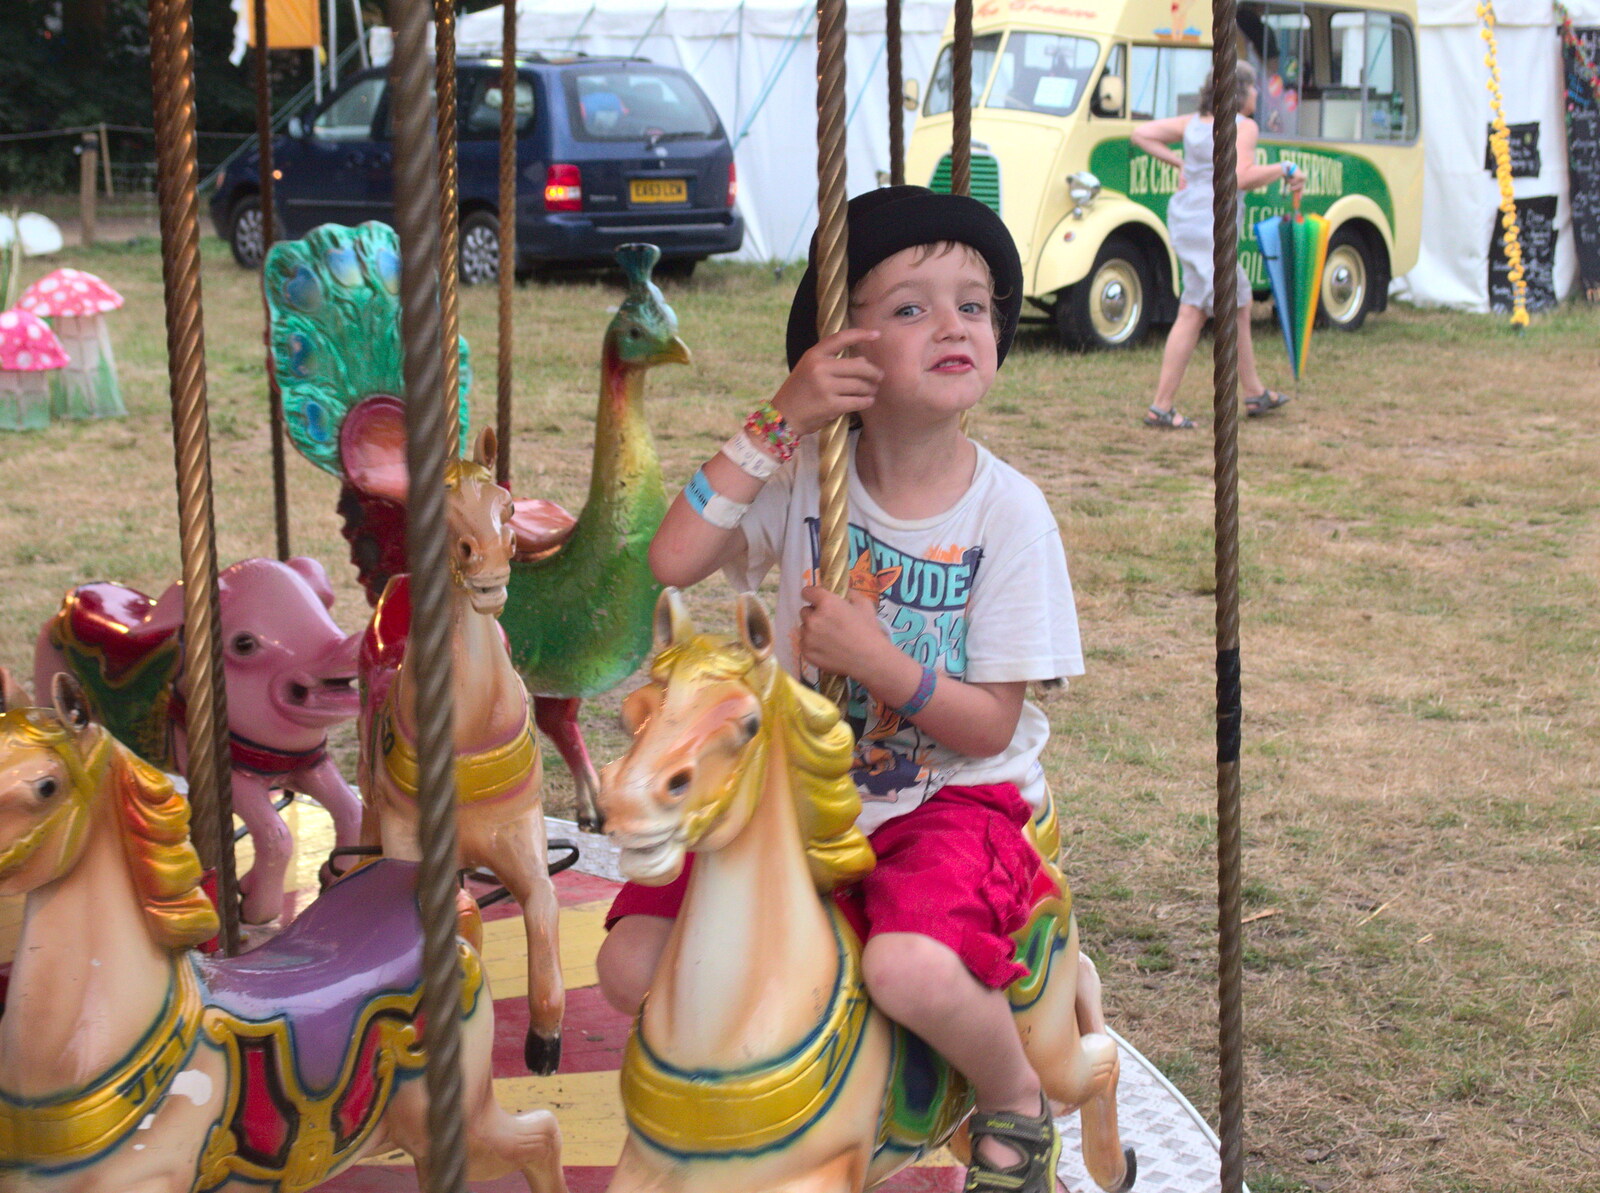 Fred on a carousel from Latitude Festival, Henham Park, Southwold, Suffolk - 17th July 2014